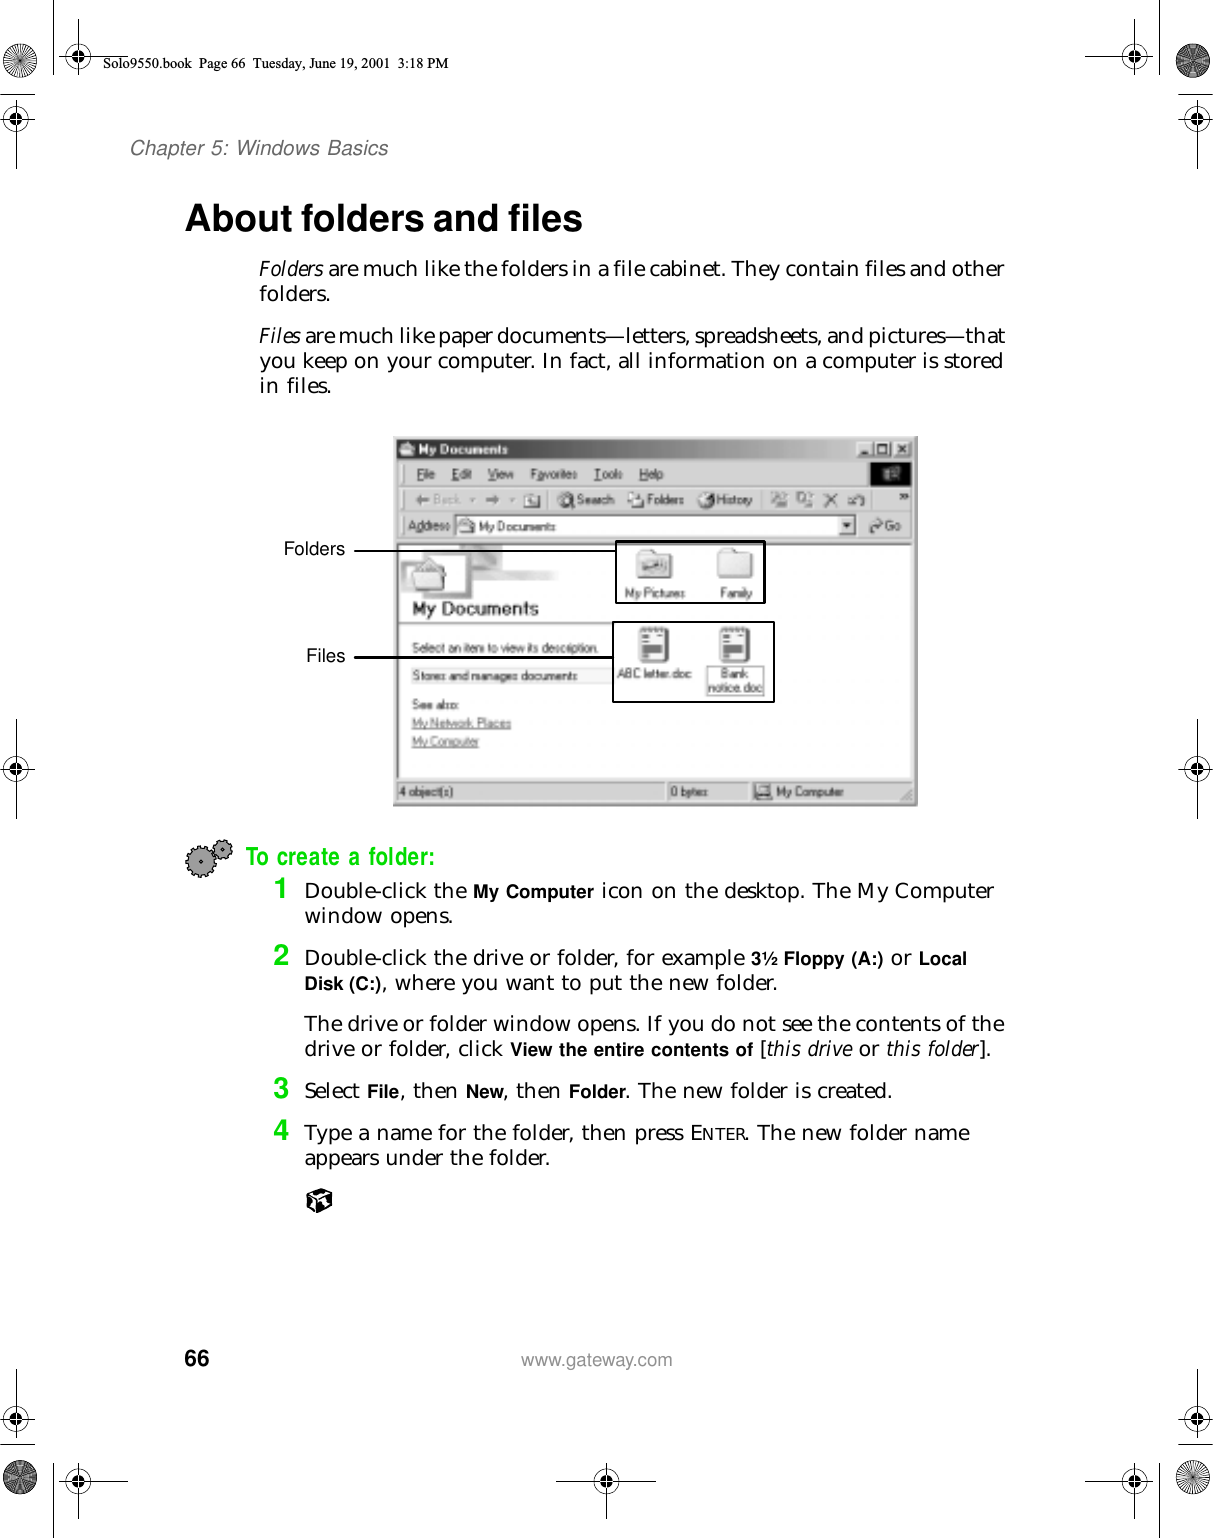 66Chapter 5: Windows Basicswww.gateway.comAbout folders and filesFolders are much like the folders in a file cabinet. They contain files and other folders.Files are much like paper documents—letters, spreadsheets, and pictures—that you keep on your computer. In fact, all information on a computer is stored in files.To create a folder:1Double-click the My Computer icon on the desktop. The My Computer window opens.2Double-click the drive or folder, for example 3½ Floppy (A:) or Local Disk (C:), where you want to put the new folder.The drive or folder window opens. If you do not see the contents of the drive or folder, click View the entire contents of [this drive or this folder].3Select File, then New, then Folder. The new folder is created.4Type a name for the folder, then press ENTER. The new folder name appears under the folder.FoldersFilesSolo9550.book Page 66 Tuesday, June 19, 2001 3:18 PM